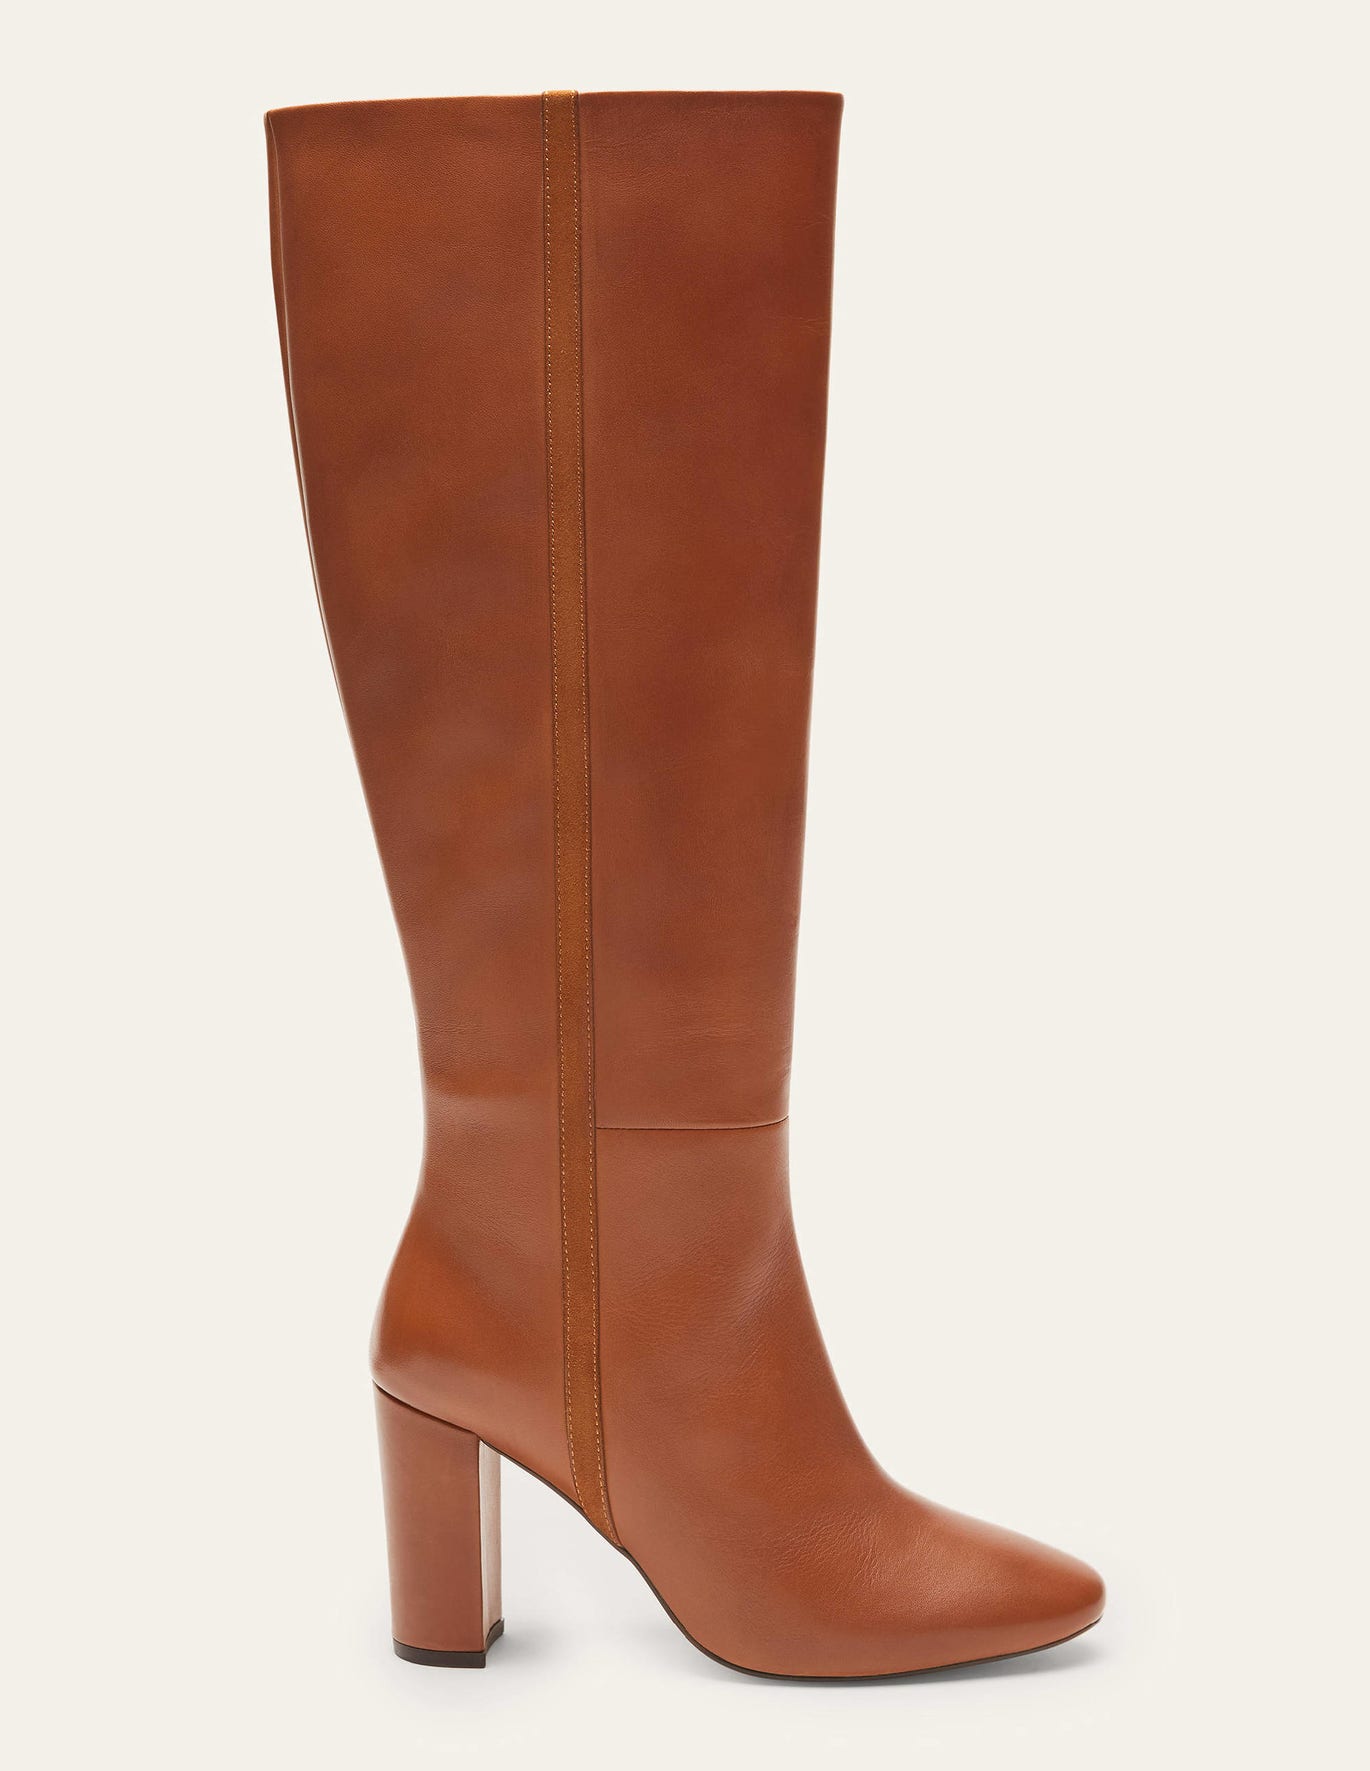 Boden Knee High Leather Boots - Tan